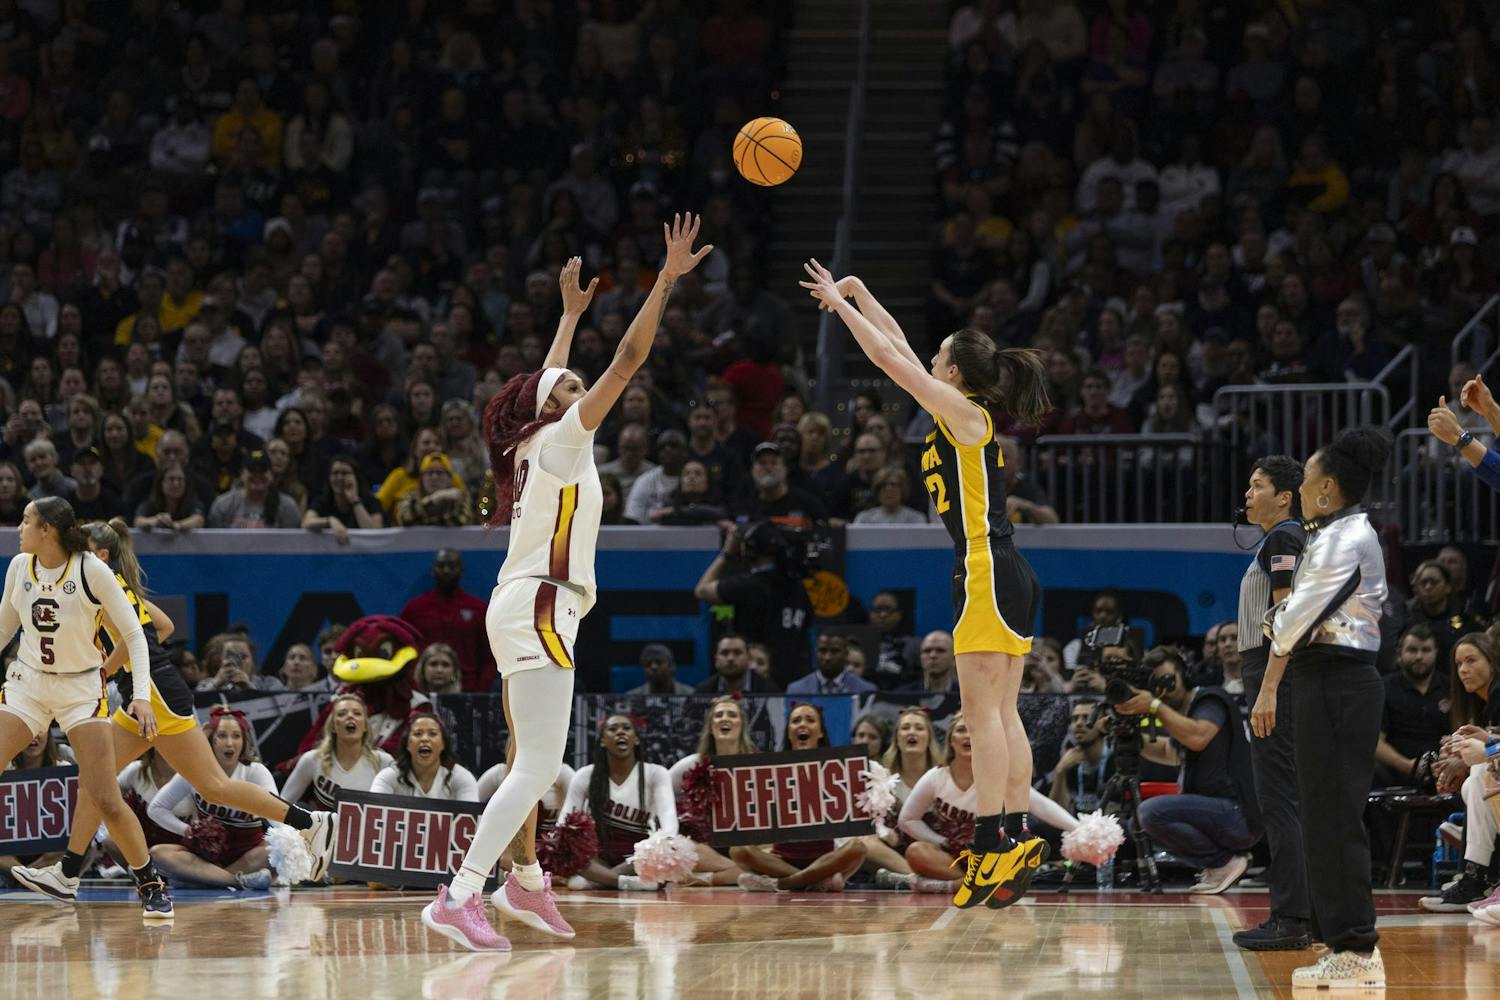 Hawkeye senior guard Caitlin Clark attempts a 3-point shot against the defense of Kamilla Cardoso during the NCAA national championship game on April 7, 2024. Both Clark and Cardoso were named to the NCAA All Tournament team.